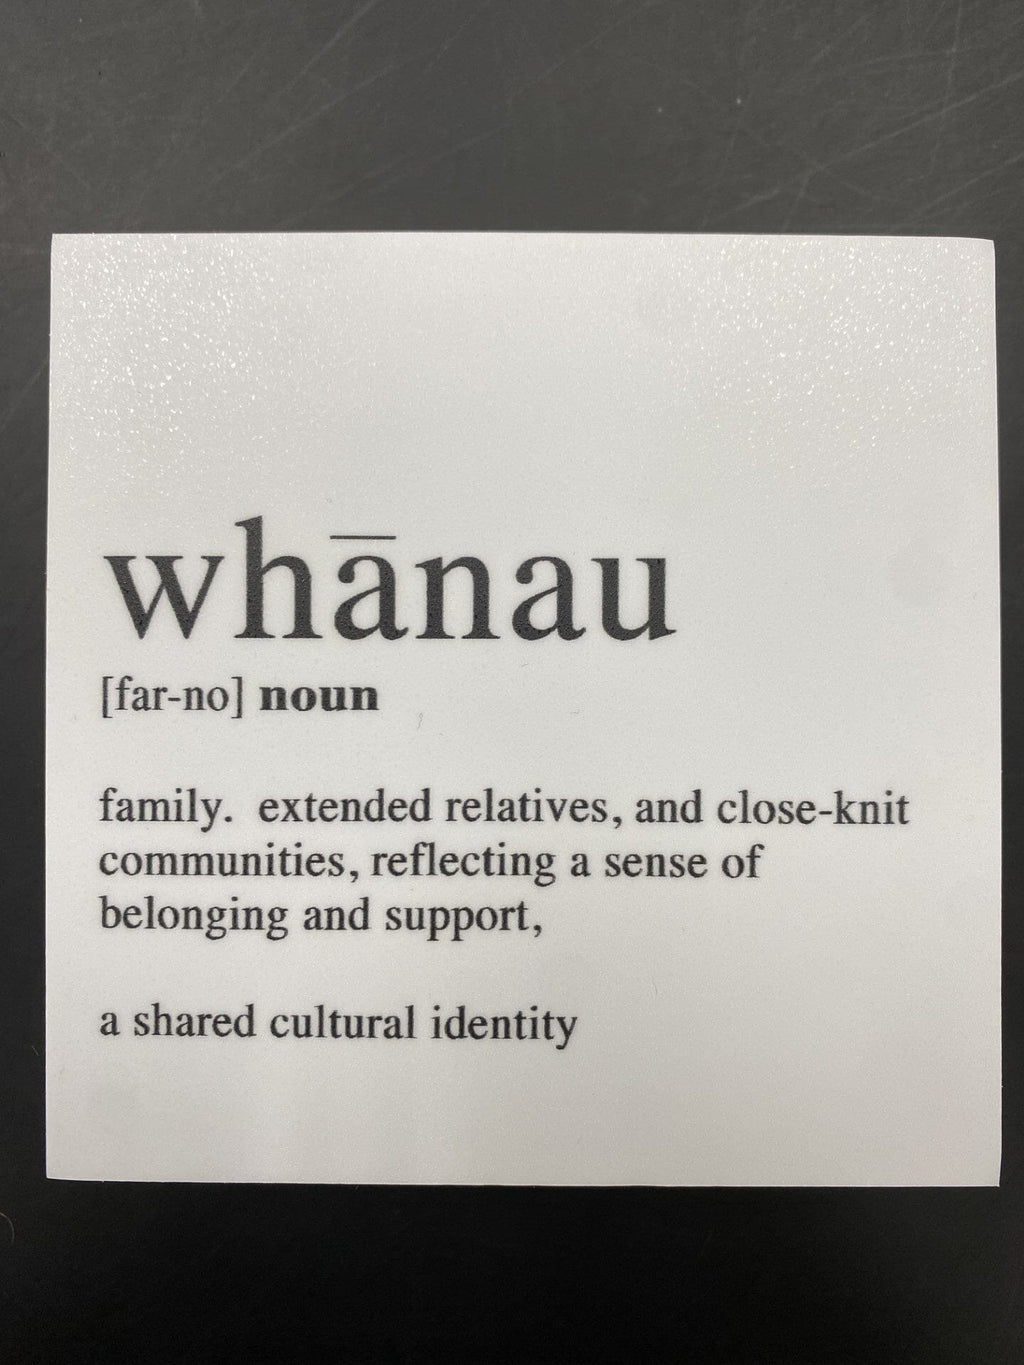 Word Block - Whanau Art - other Not specified 